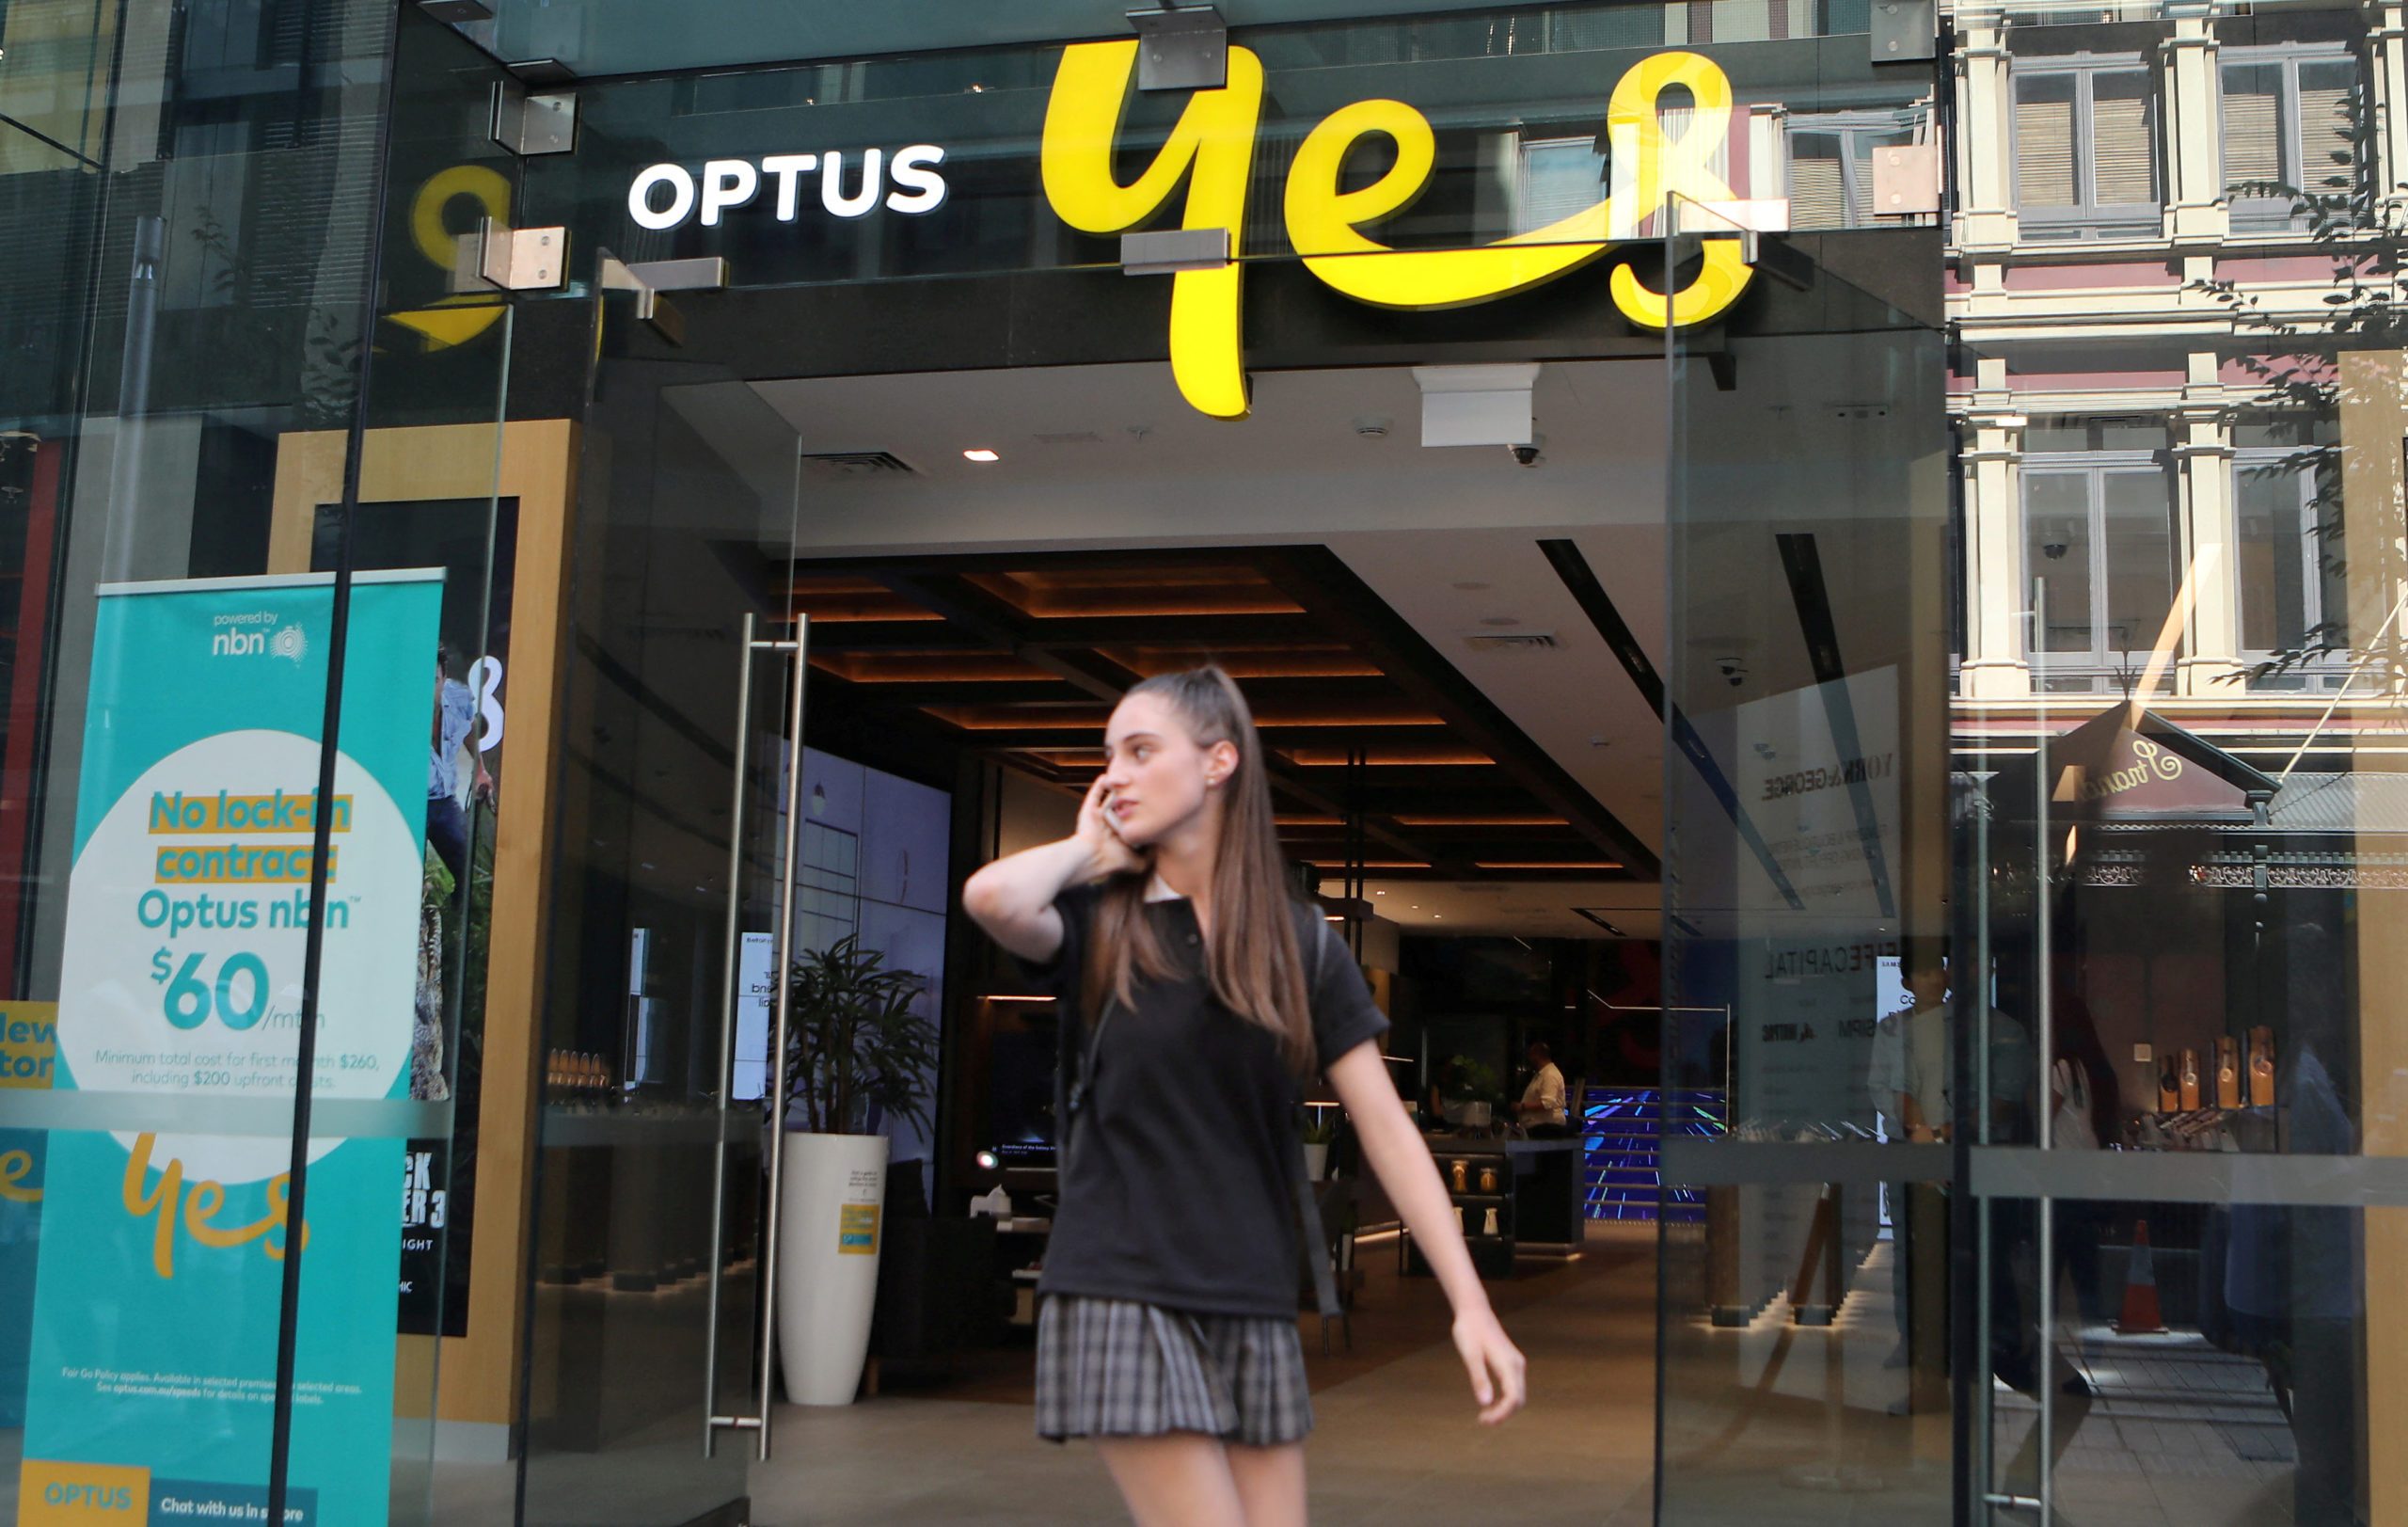 Australia unveils new privacy rules after data breach at Singtel-owned Optus